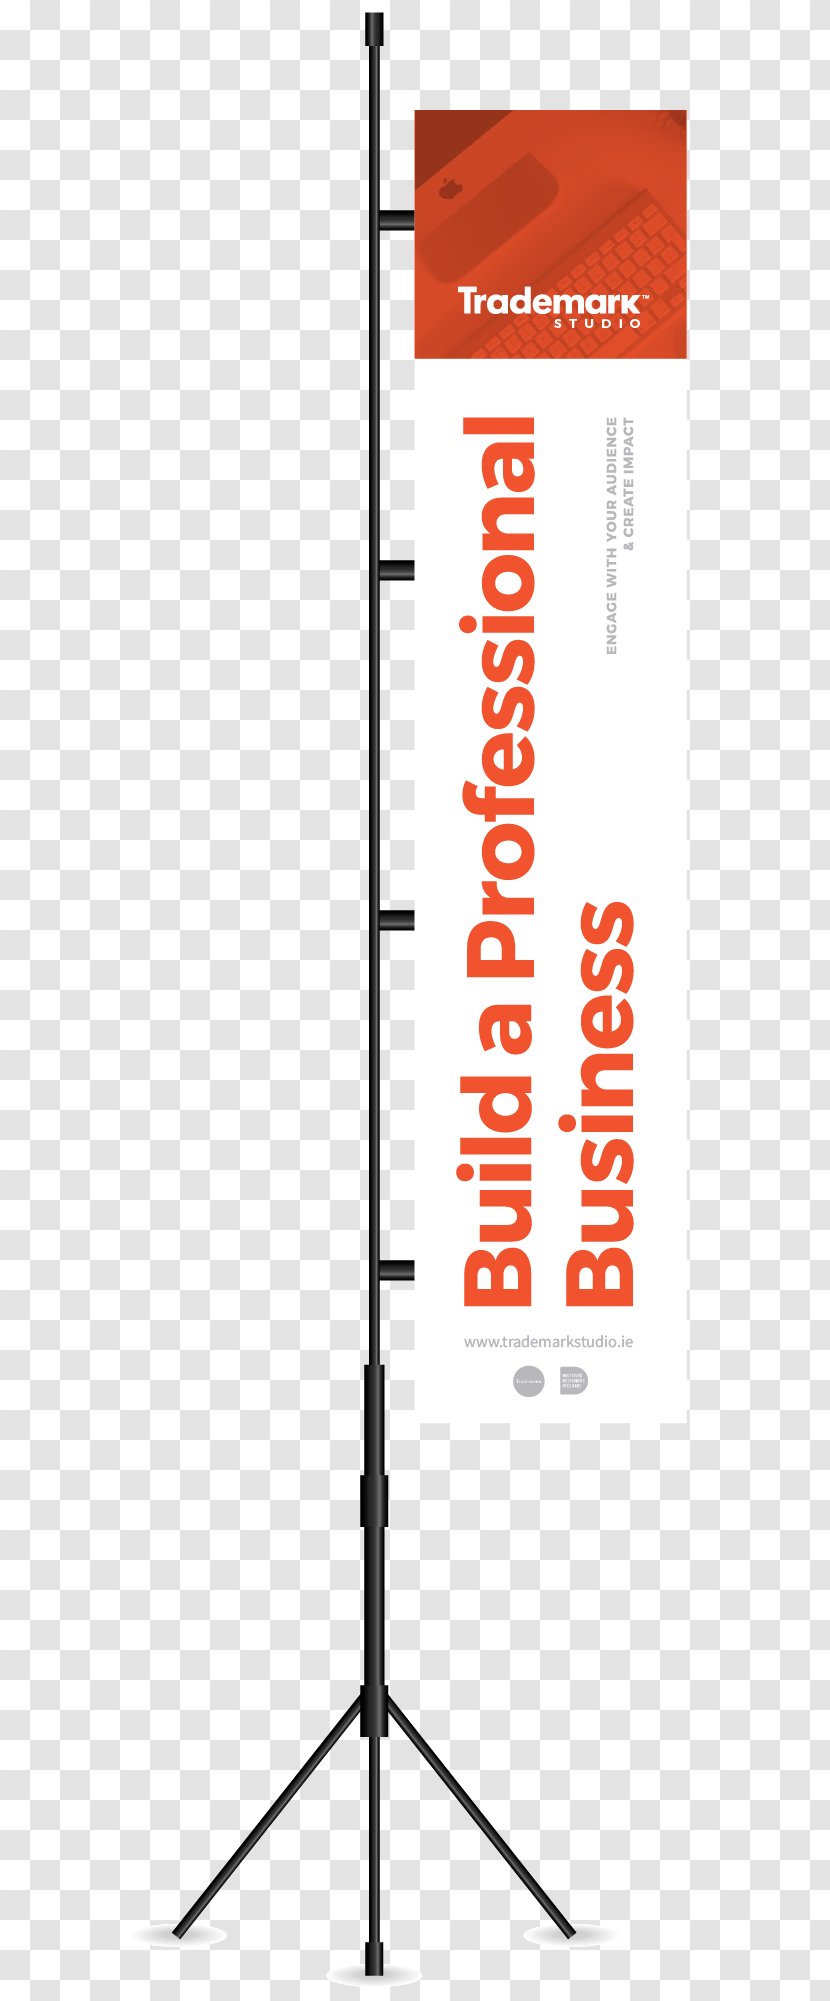 Vodafone BusinessObjects Font - Area - Corporate Roll Up Transparent PNG